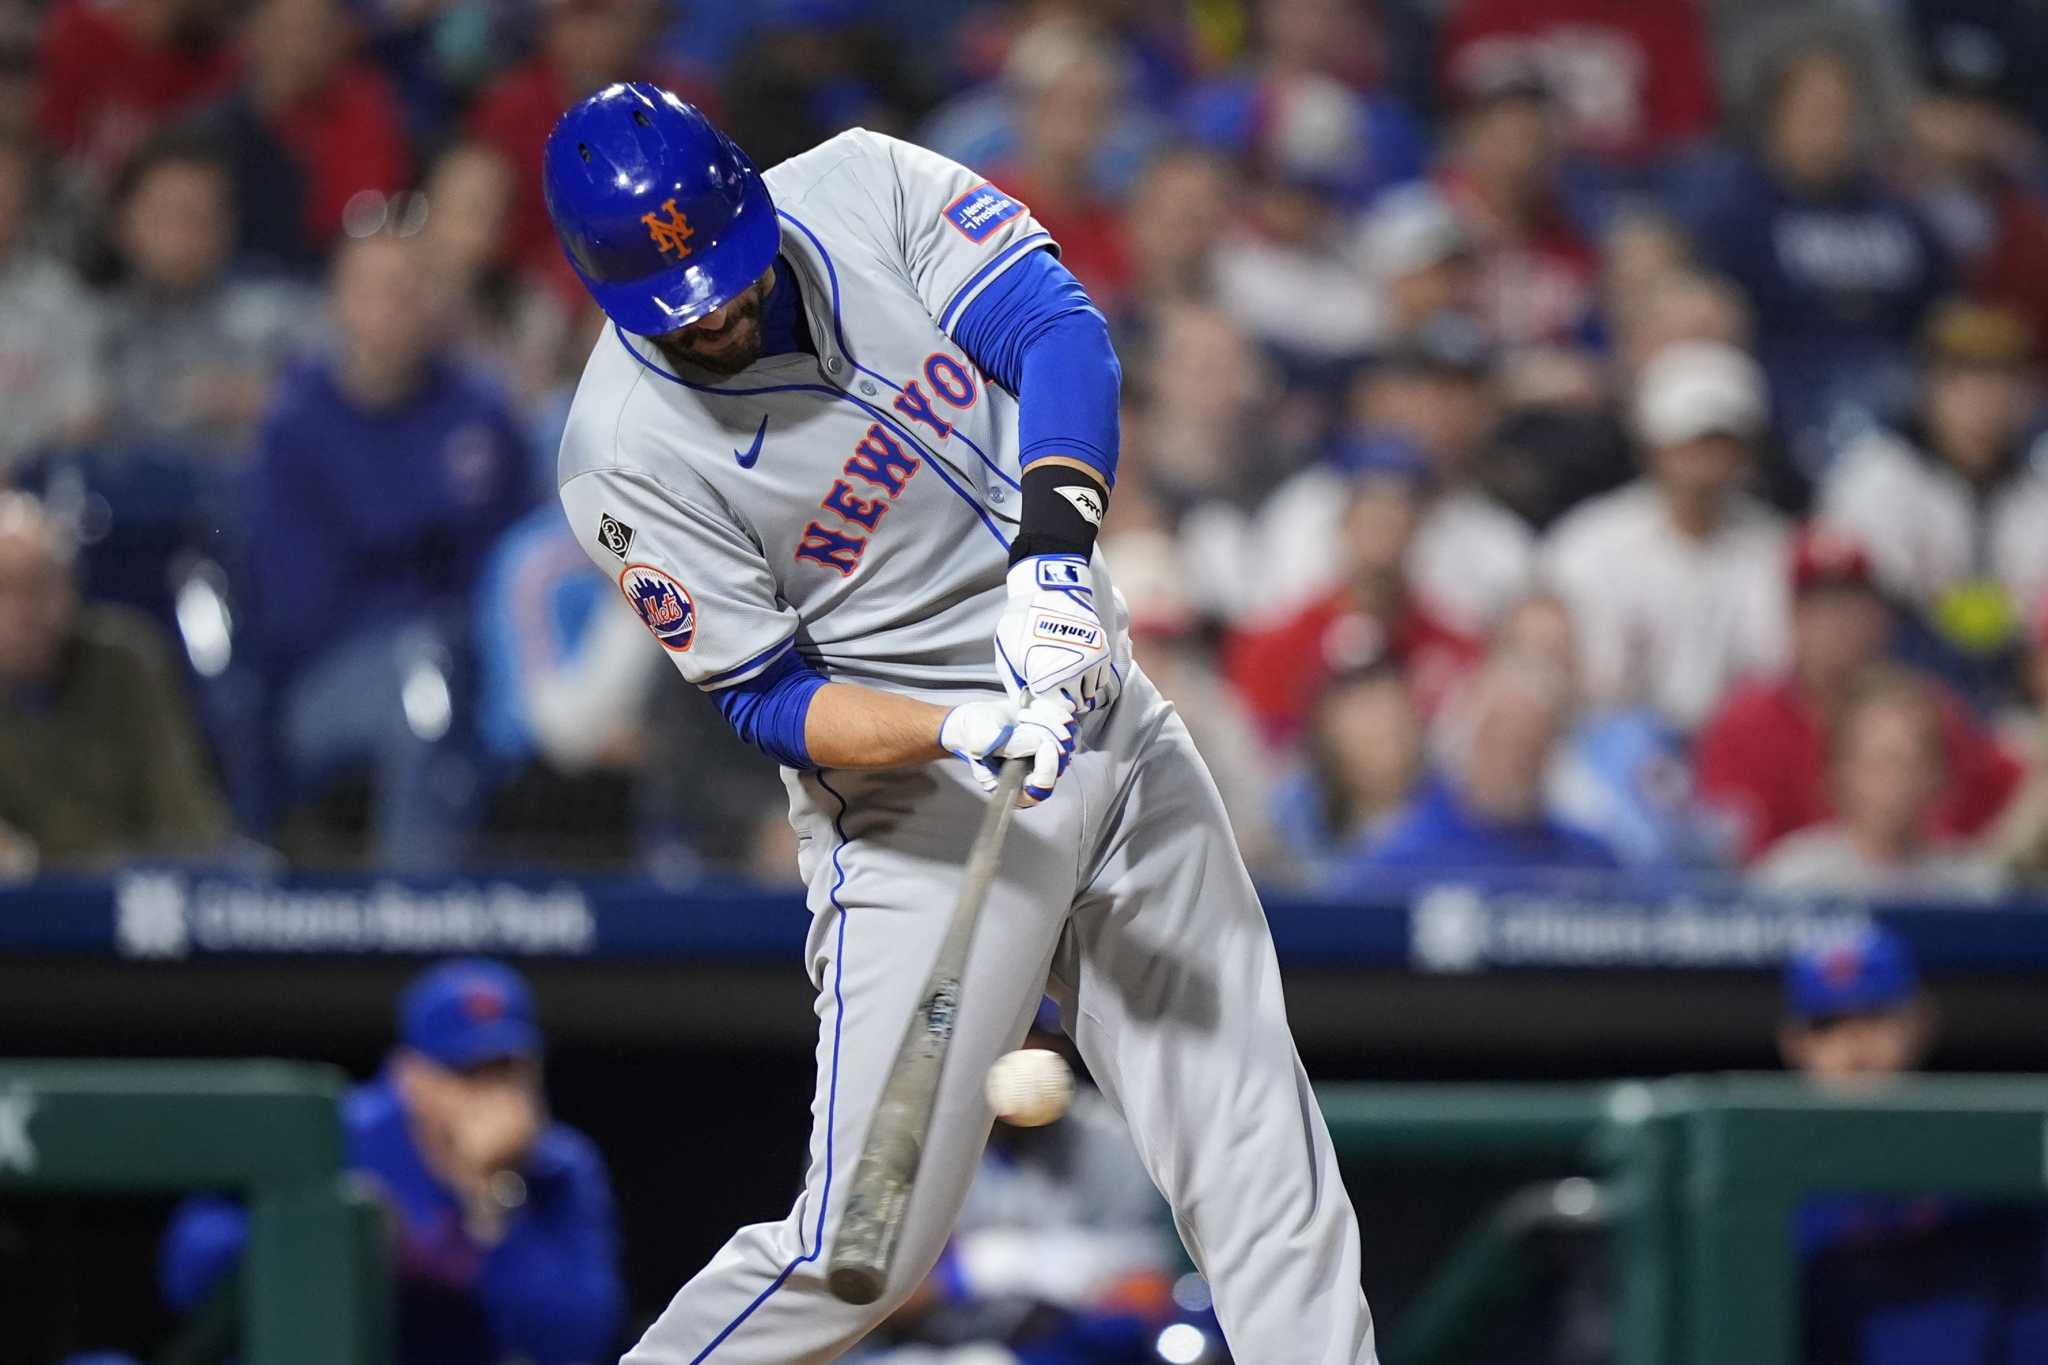 Mets beat Phillies 6-5 in 11 innings to avoid home-and-home sweep